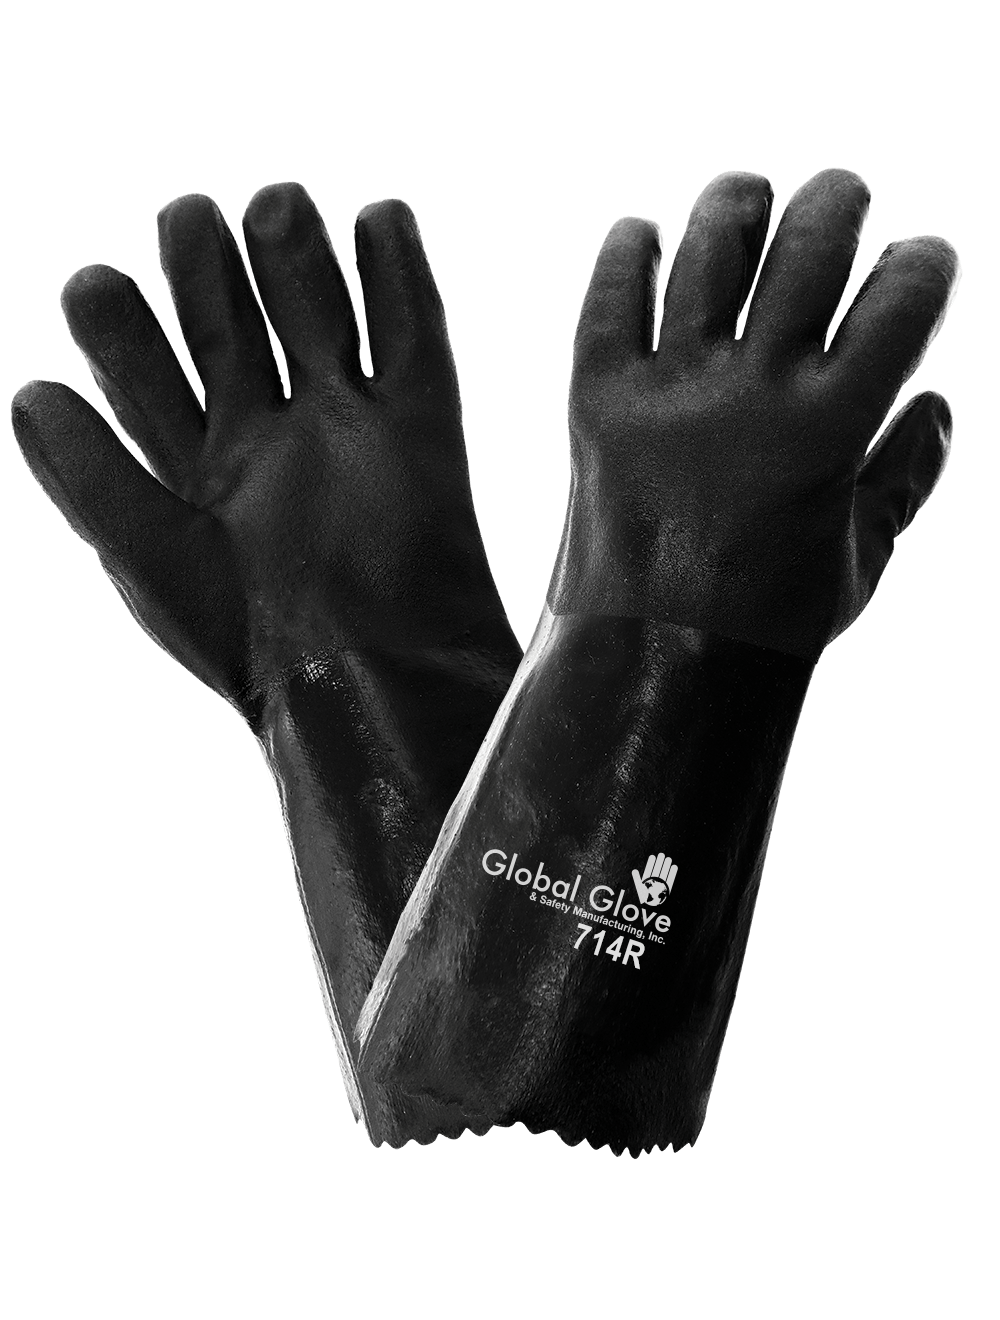 Jersey Lined Black PVC Chemical Handling Glove - Spill Control